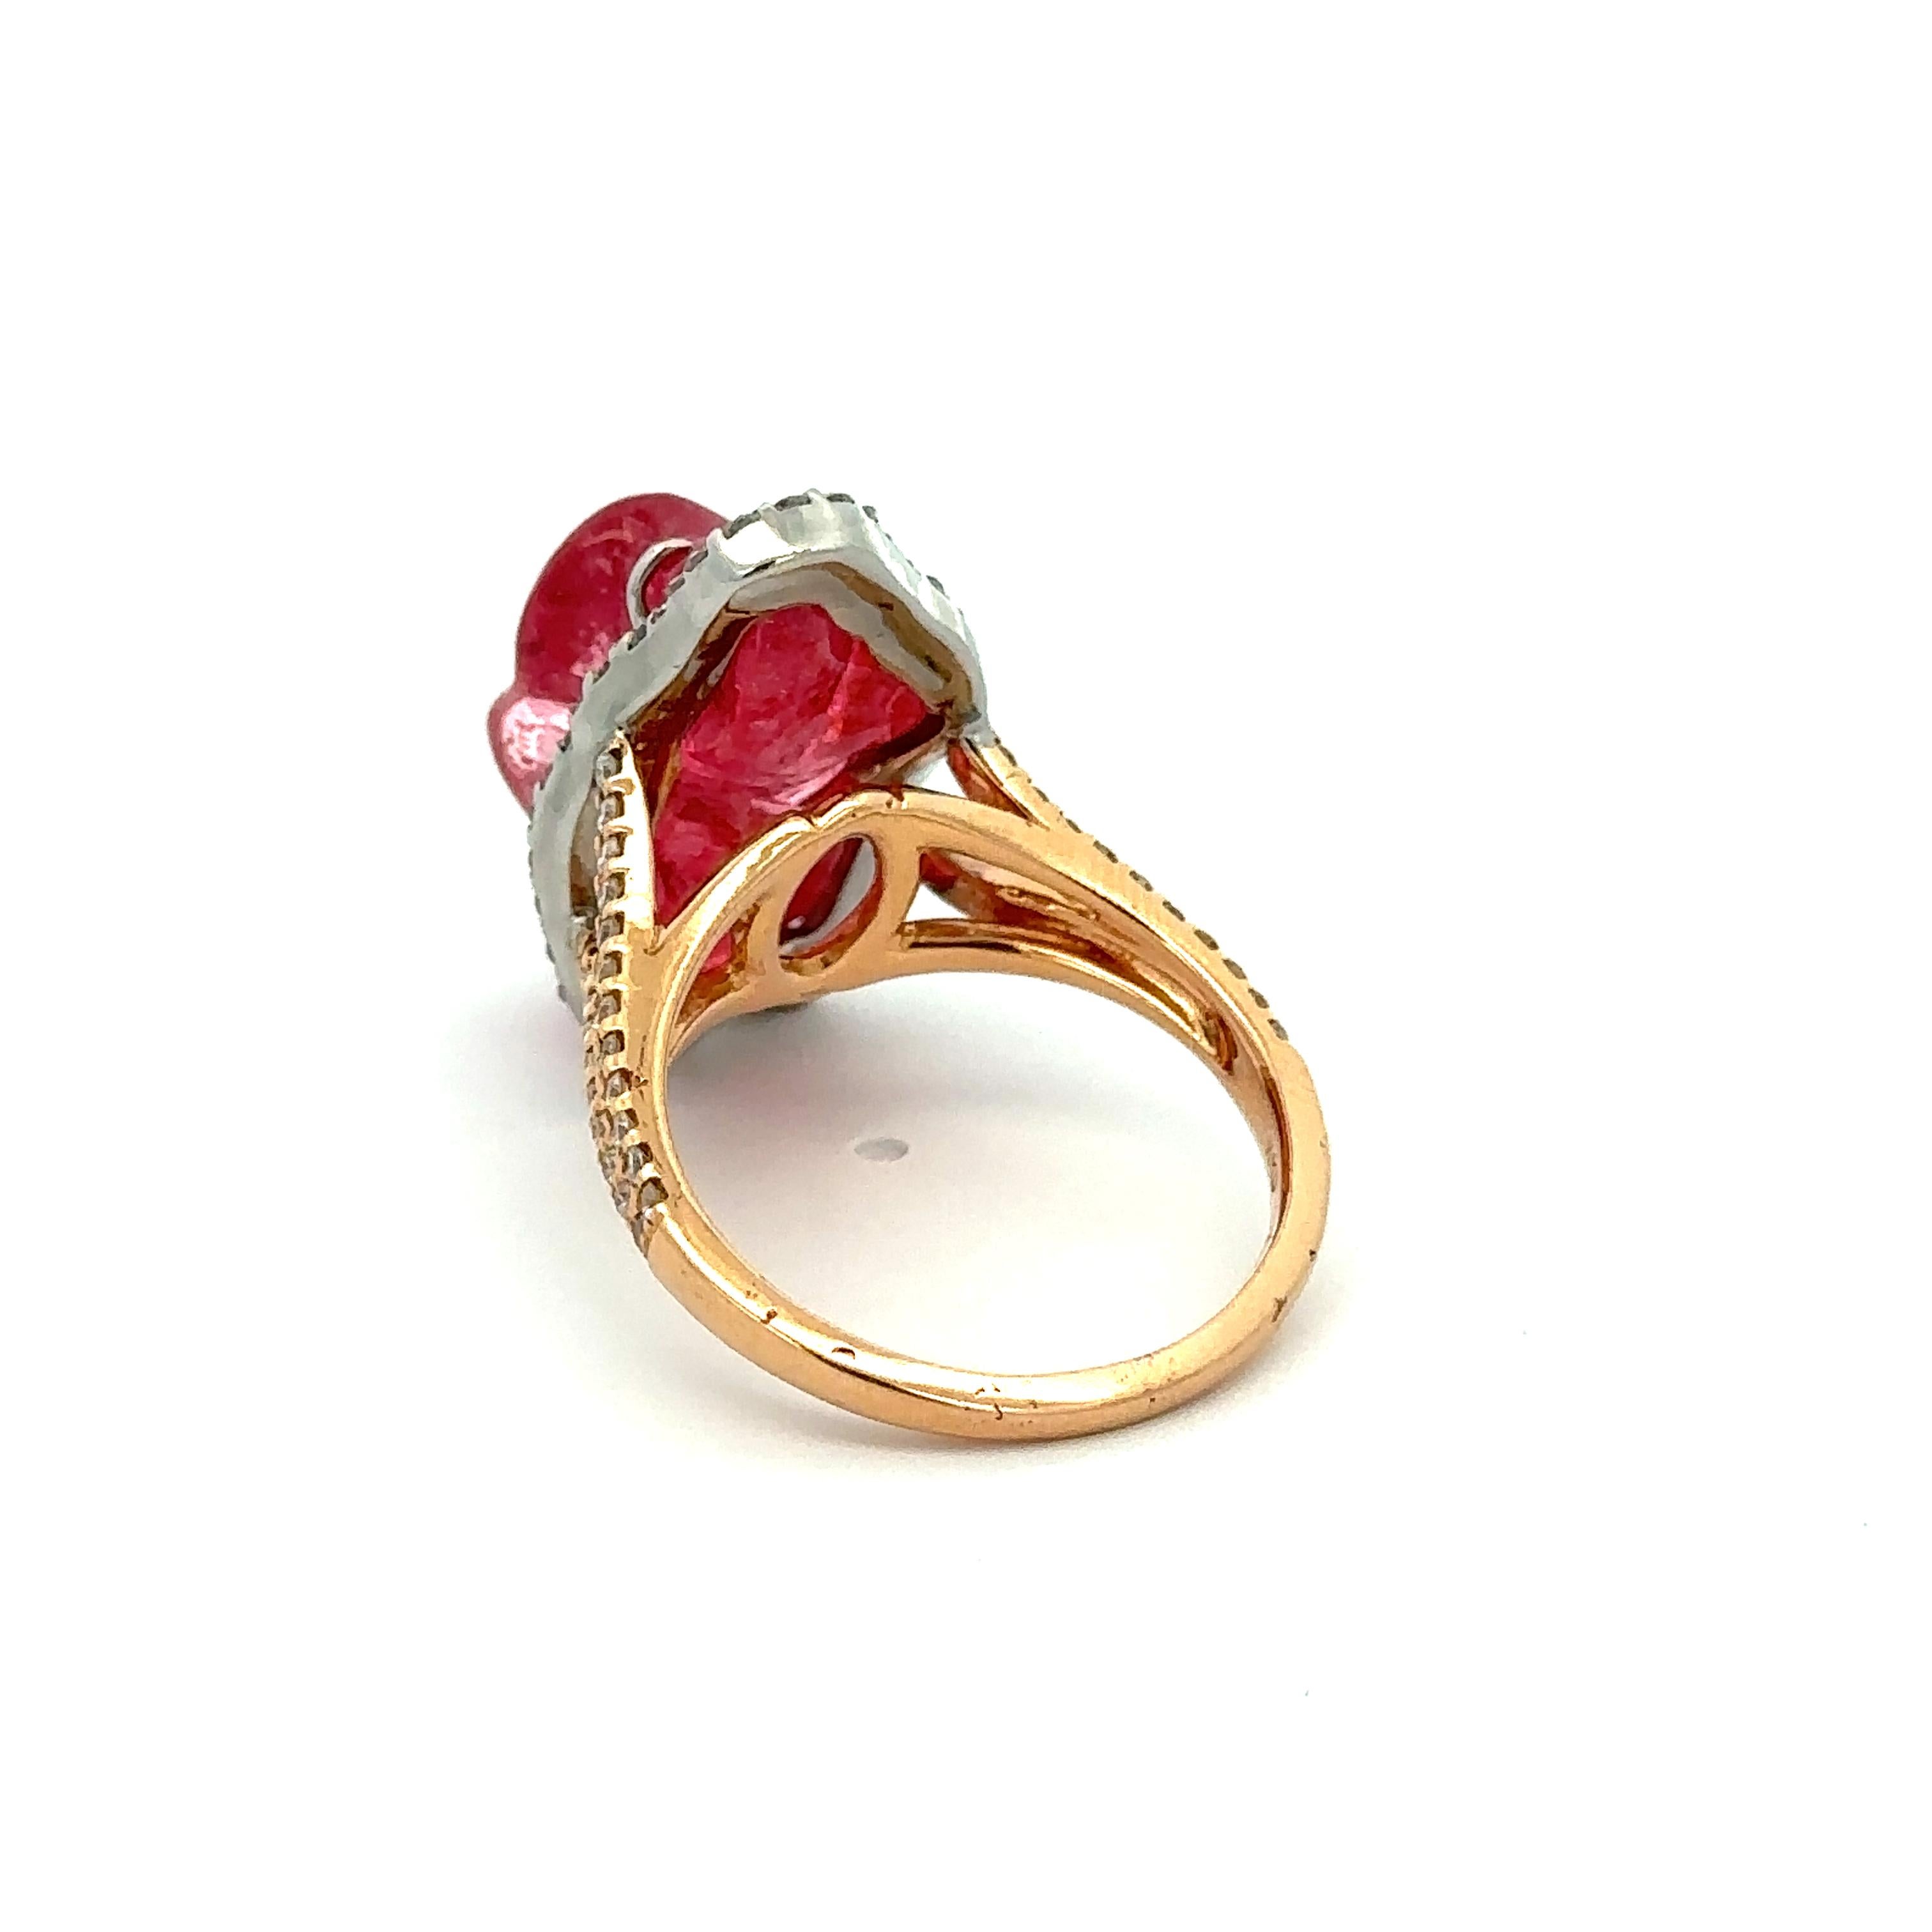 Uncut Kimberly McDonald 18k Gold GIA Orangy Pink Tumbled Free Form Spinel Diamond Ring For Sale